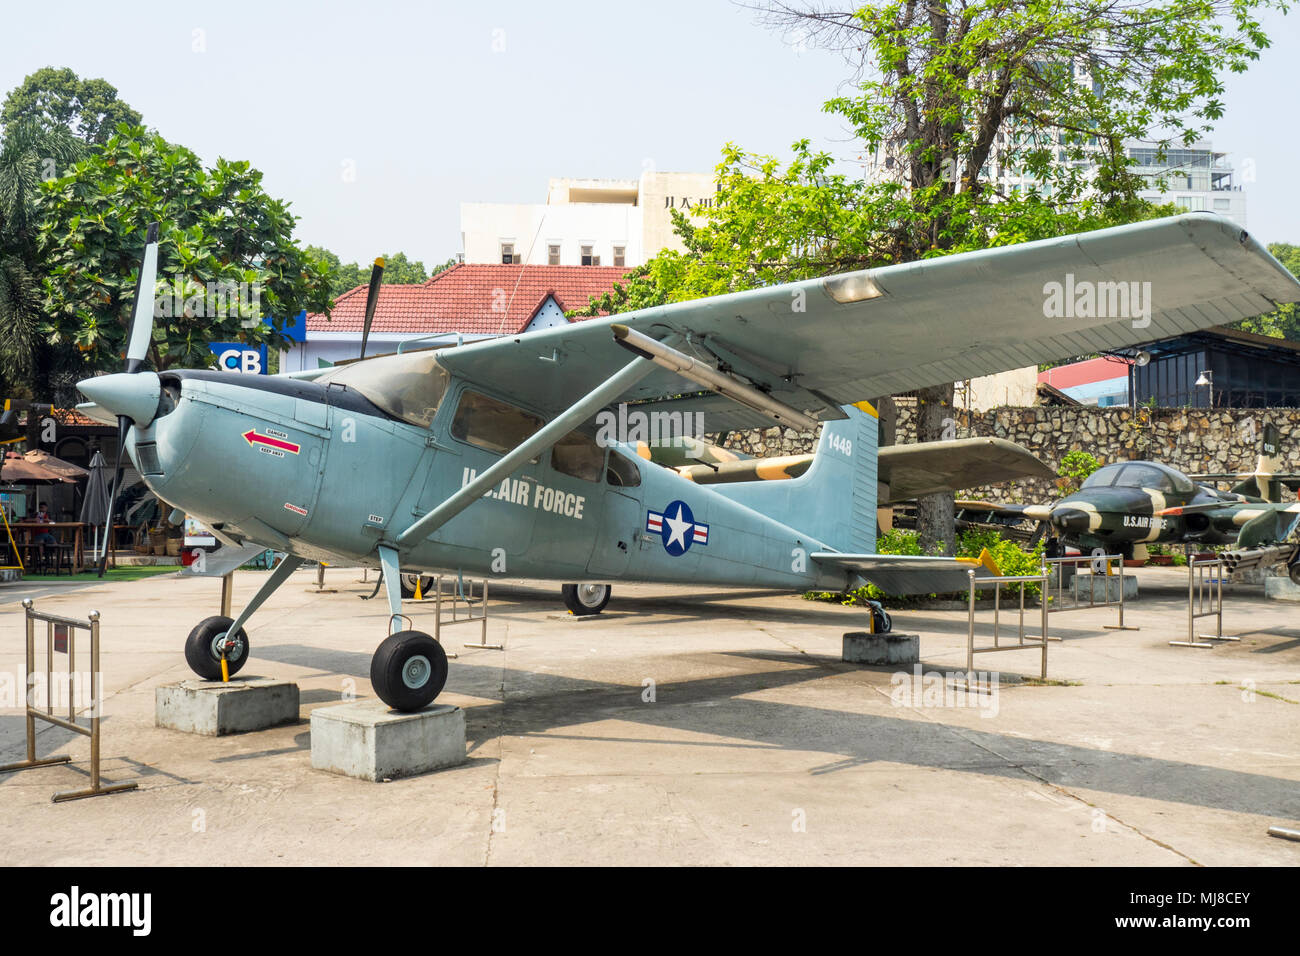 US Air Force Cessna U.17 reconnaissance plane from the Vietnam War on display at the War Remnants Museum, Ho Chi Minh City, Vietnam. Stock Photo